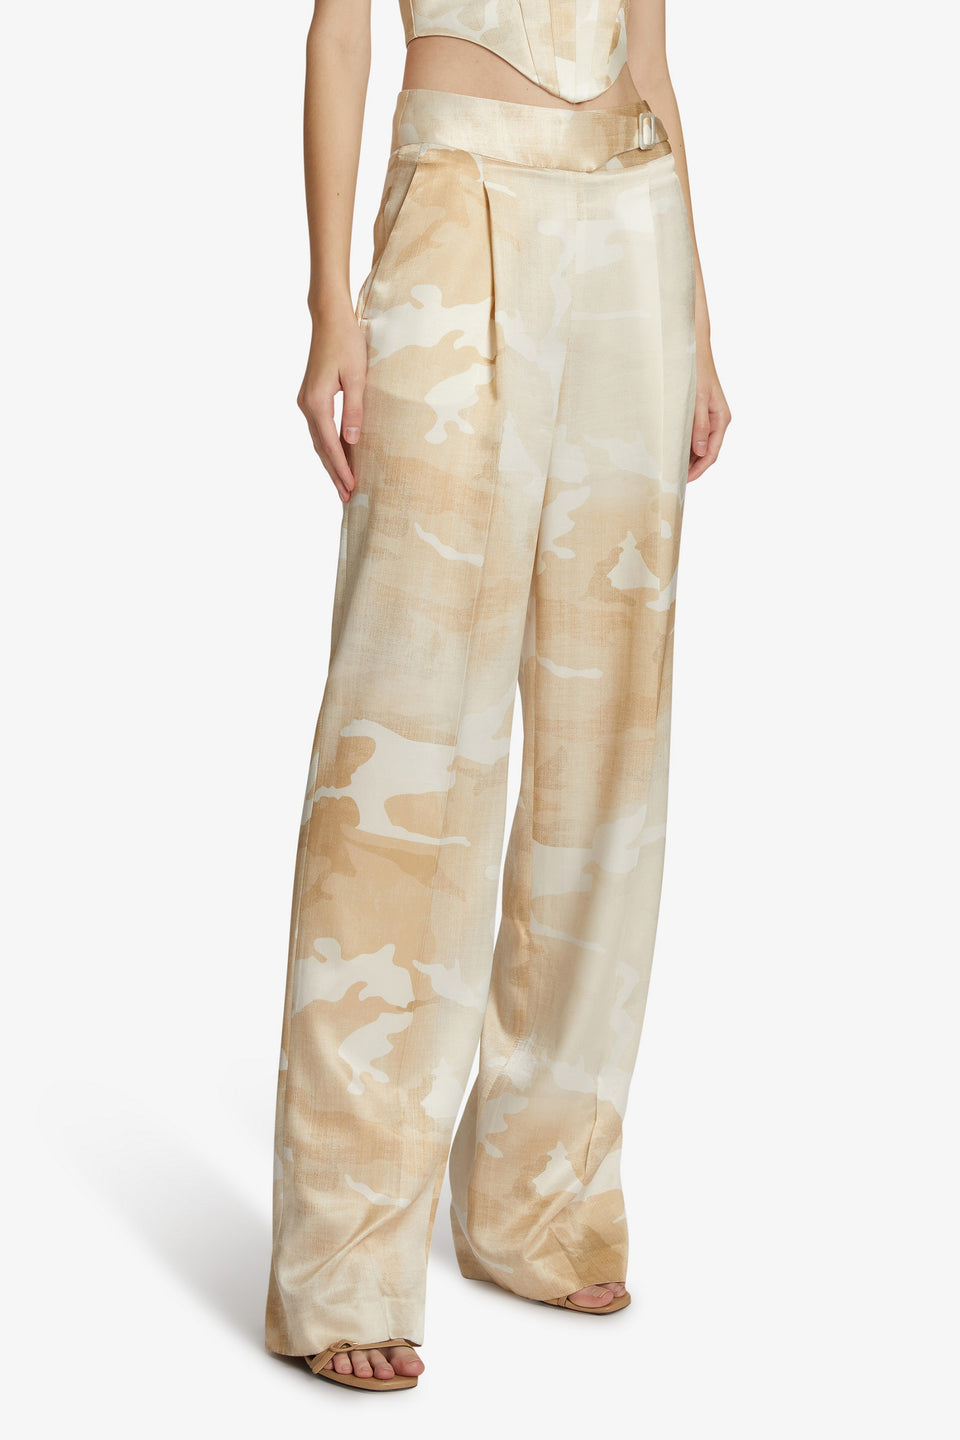 Tailored trousers in beige fabric